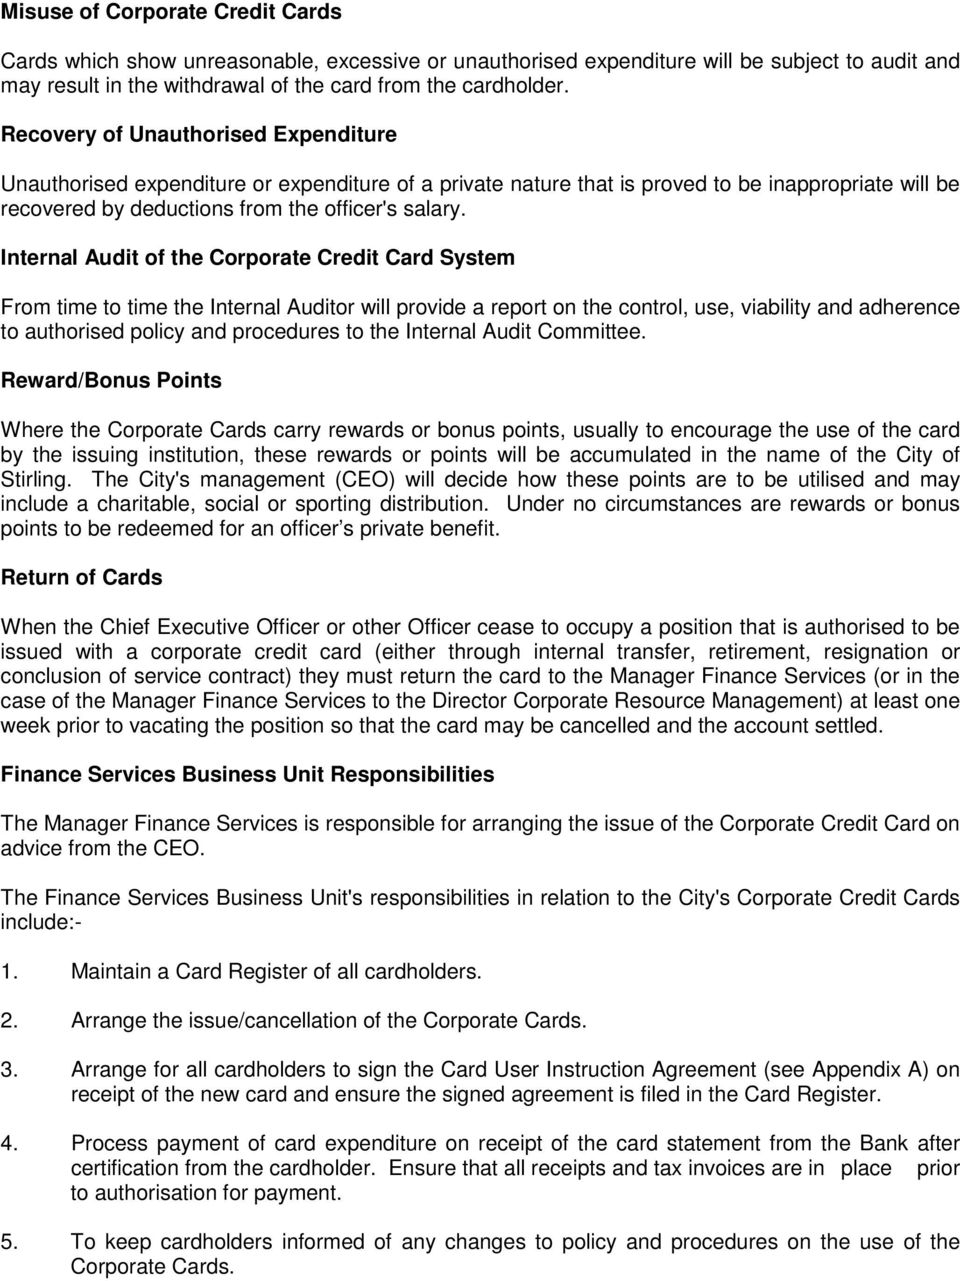 Company Credit Card Usage Agreement Issue And Use Of Corporate Credit Cards Policy Pdf